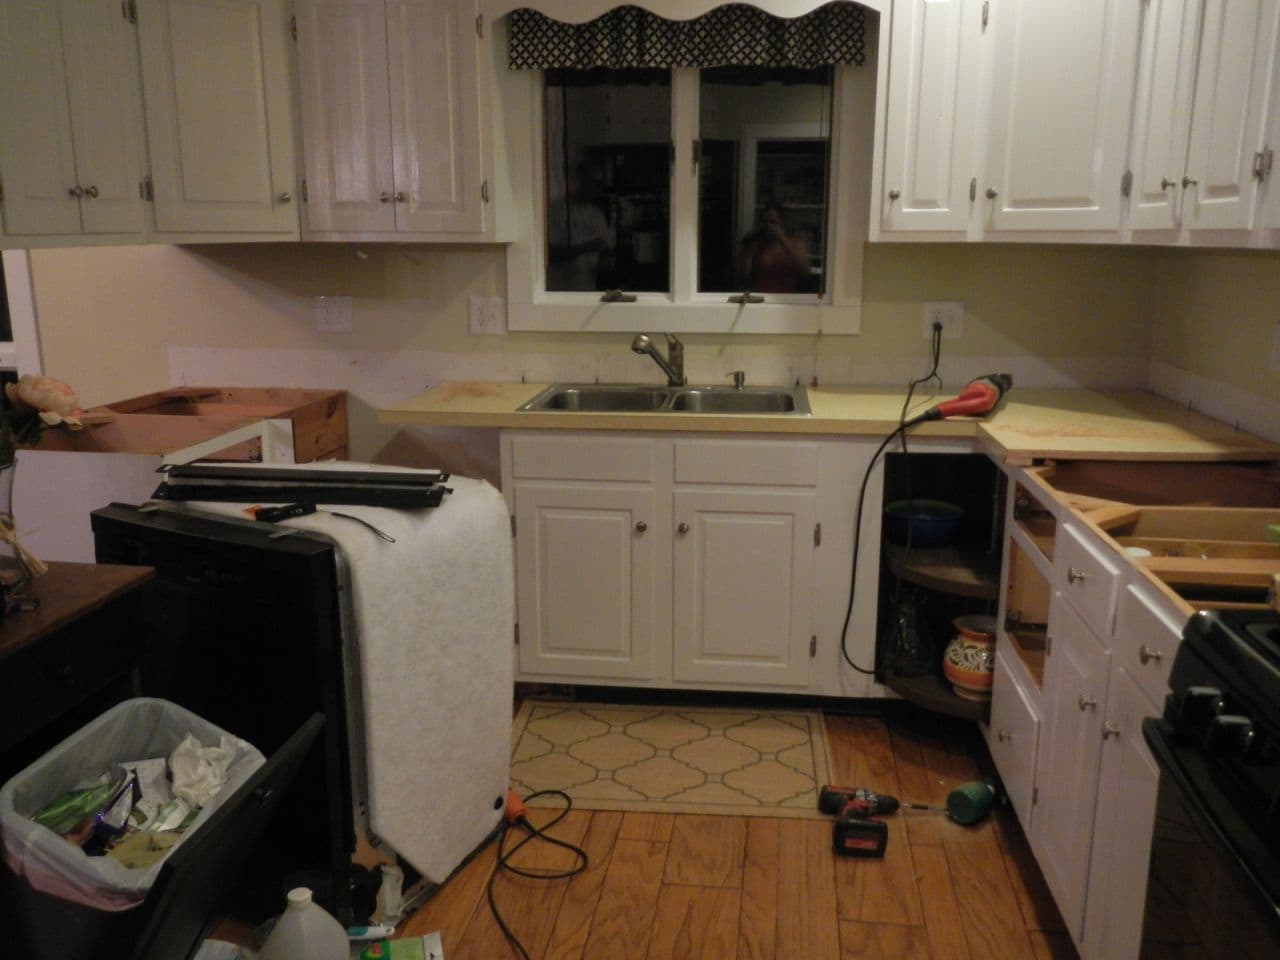 Kitchen in Chaos